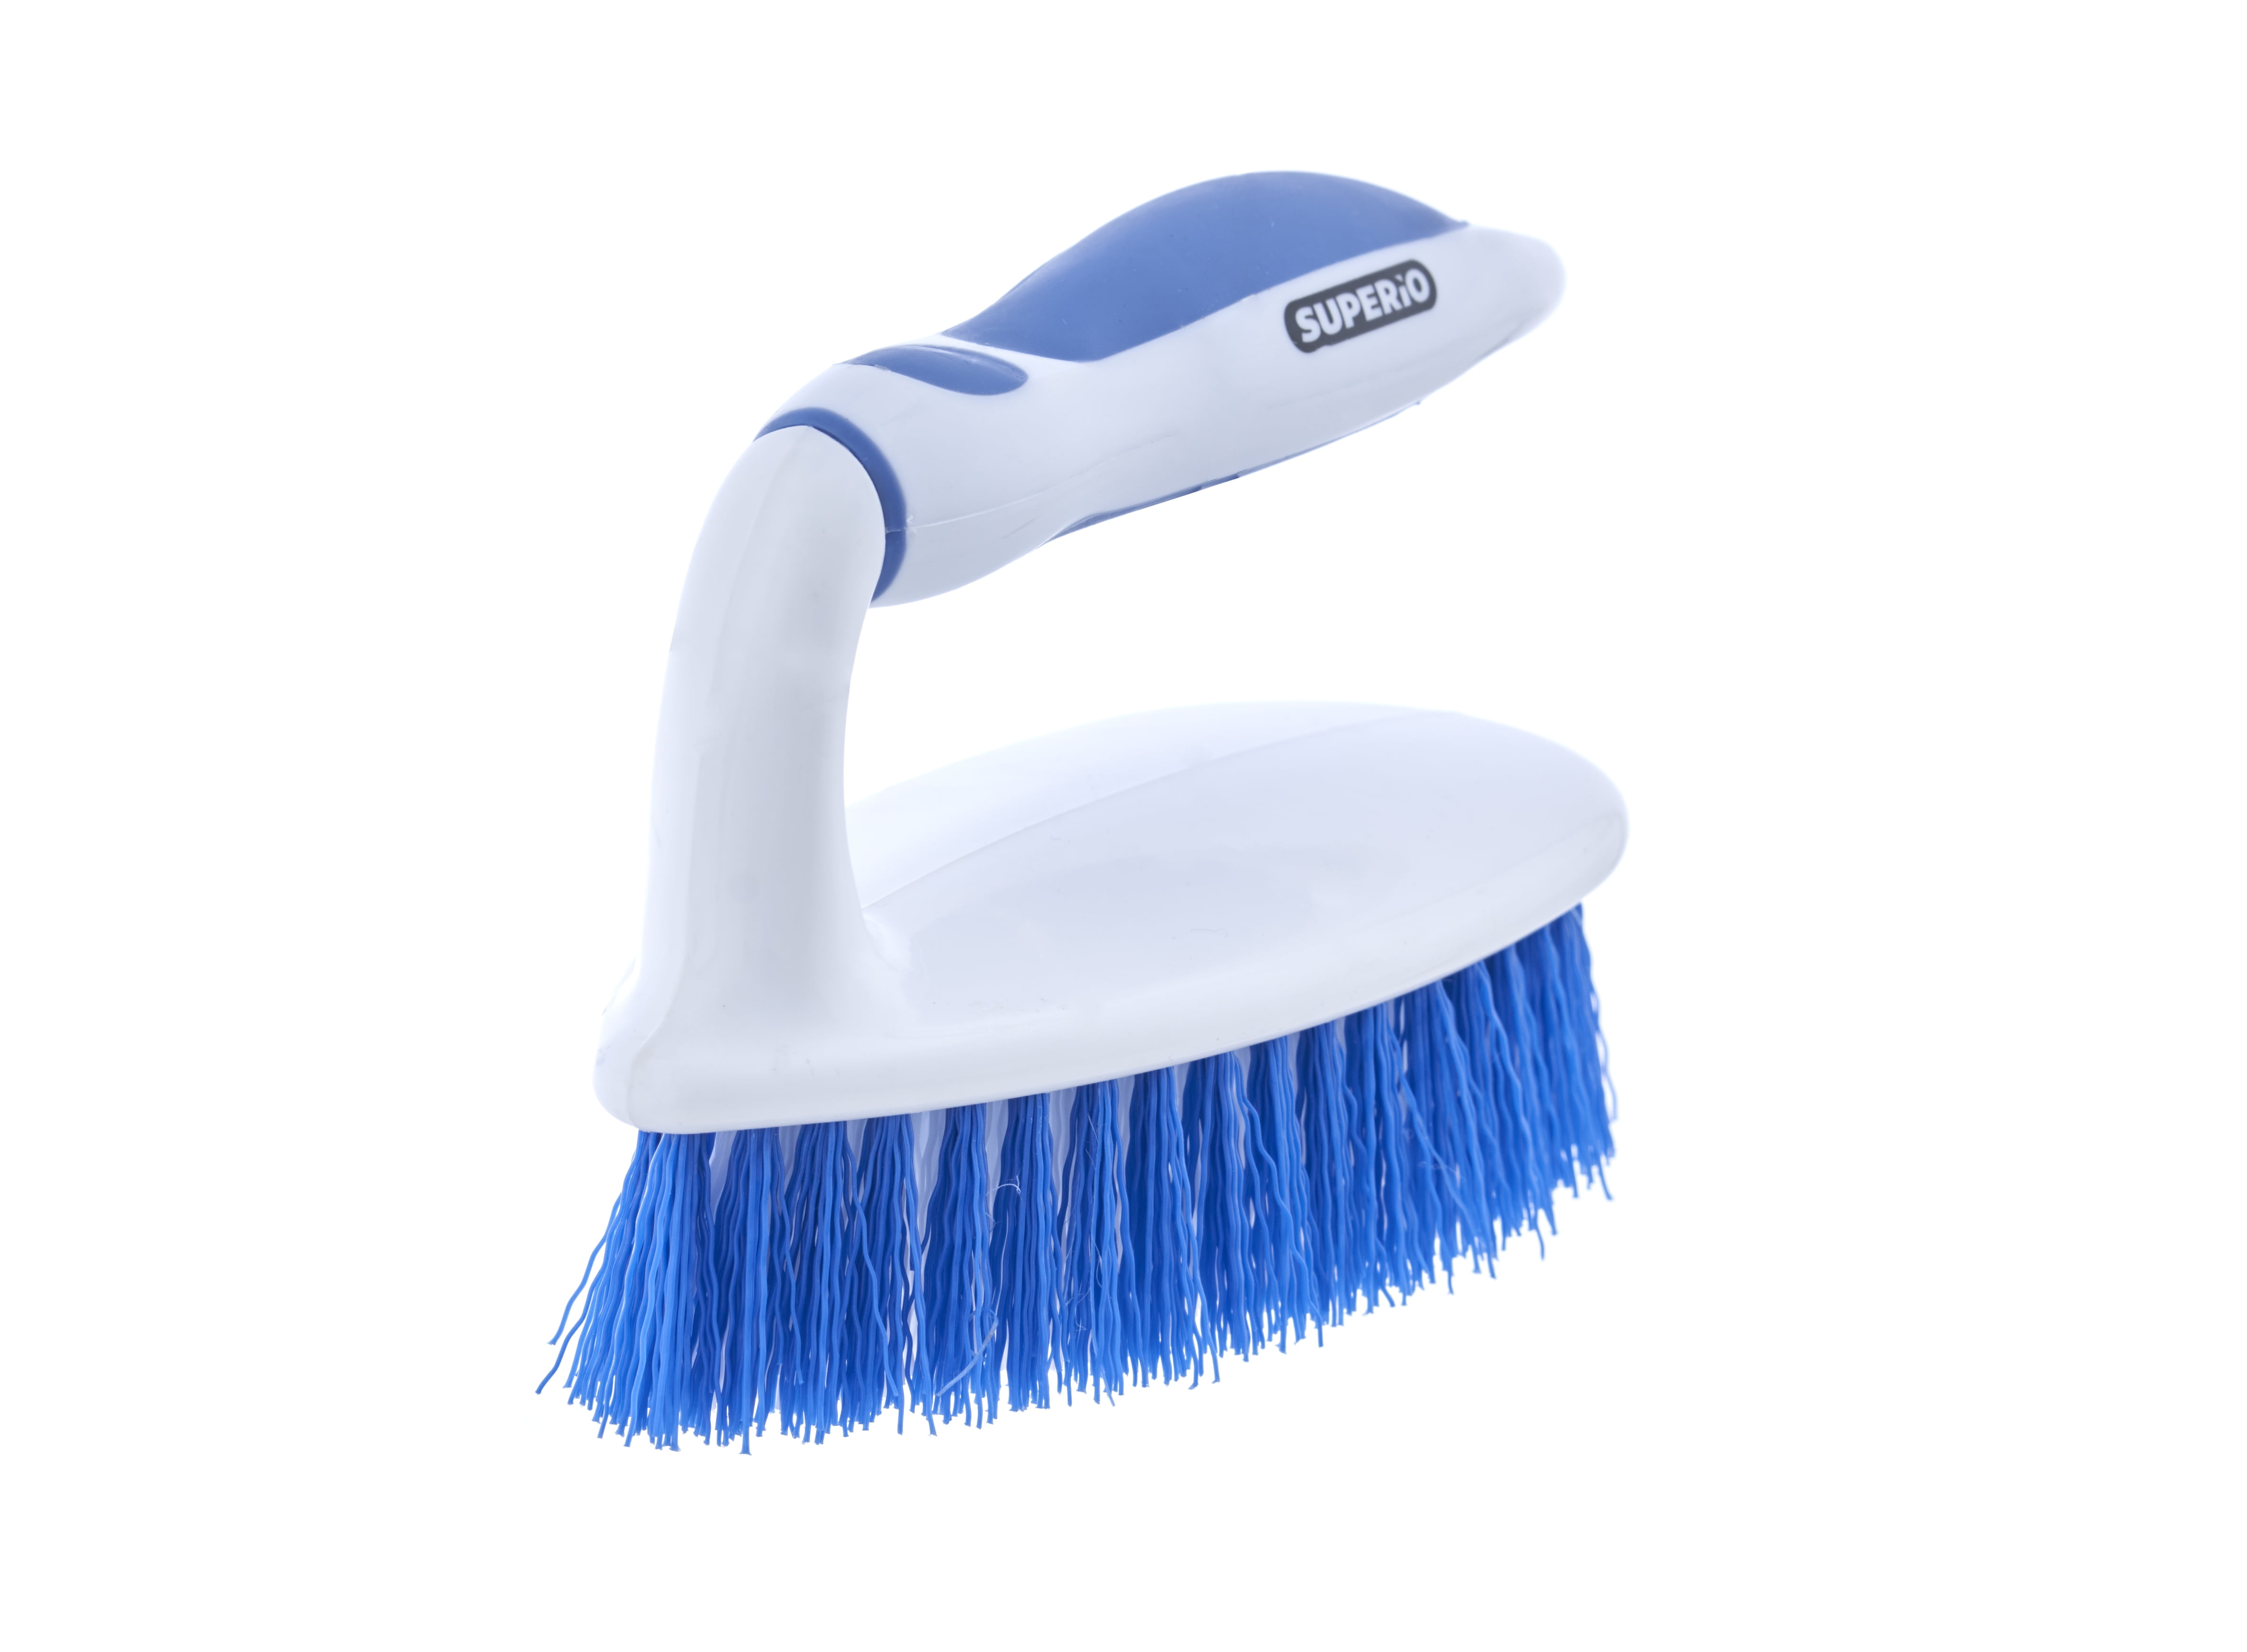  Superio Cleaning Scrub Brush with Stiff Bristles and Comfort  Grip Handle,Blue 2 Pack Heavy-Duty Household Utility Scrubber for Kitchen,  Bathroom, Shower, Sink, Toilet : Health & Household